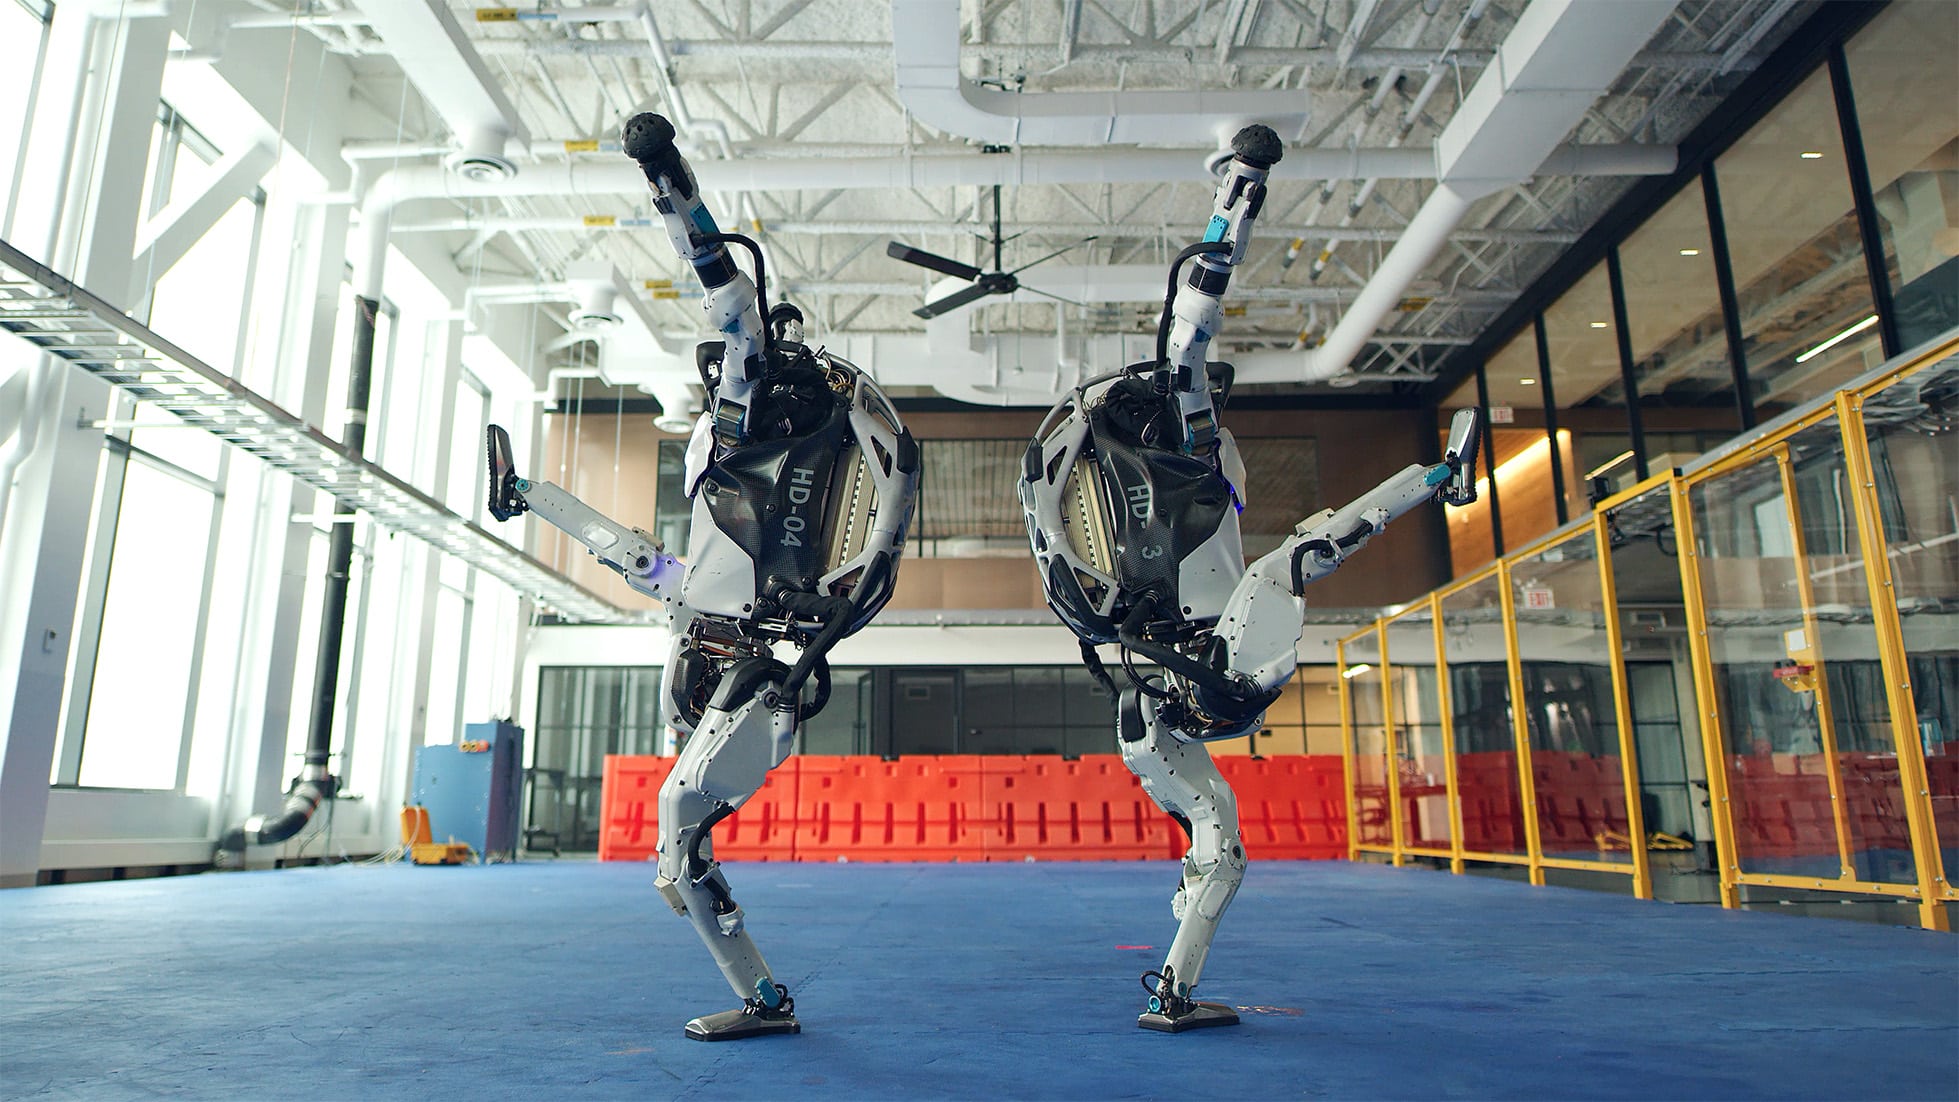 Two Atlas robots dance, standing back to back each with one leg raised